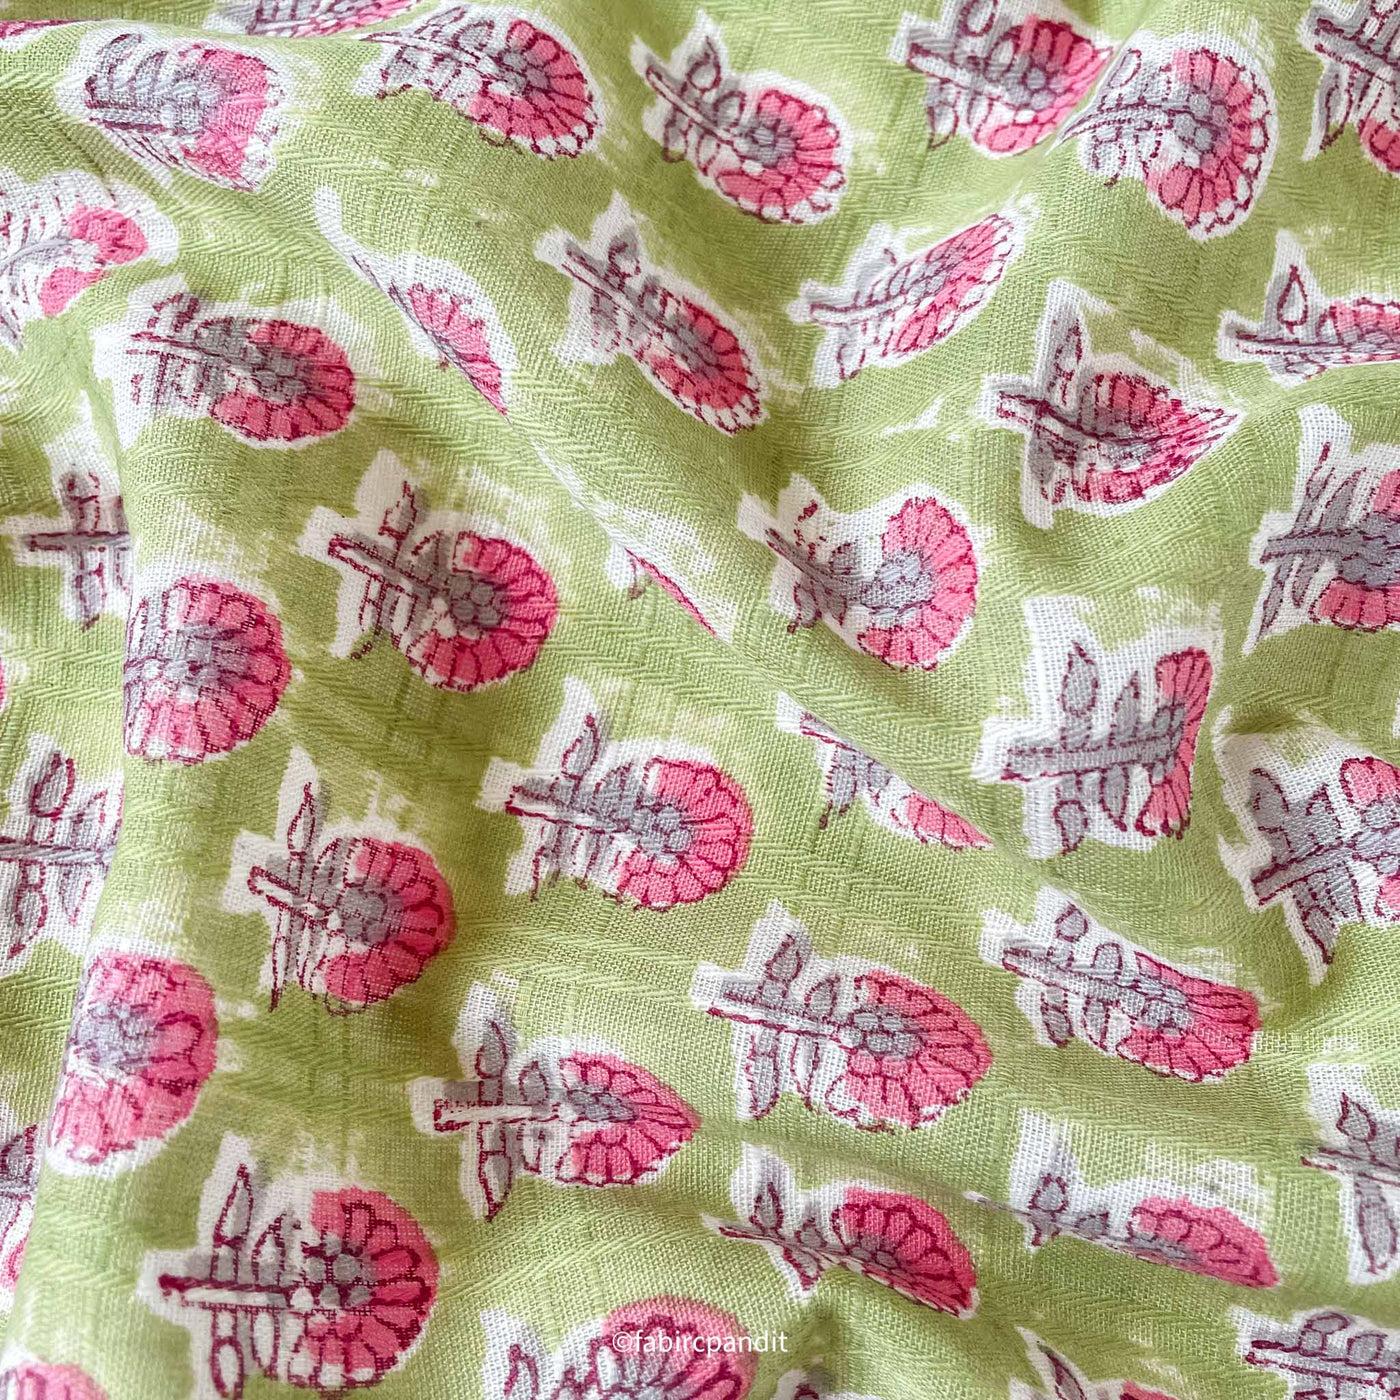 Fabric Pandit Fabric Women's Green and Pink Mughal Flower Garden | Hand Block Printed Pure Cotton Slub Kurta Fabric (2.5 meters) | Green and Pink Mughal Flower | Hand Block Printed Pure Cotton Slub Pyjama Fabric (2.5 meters) | Unstitched Combo Set